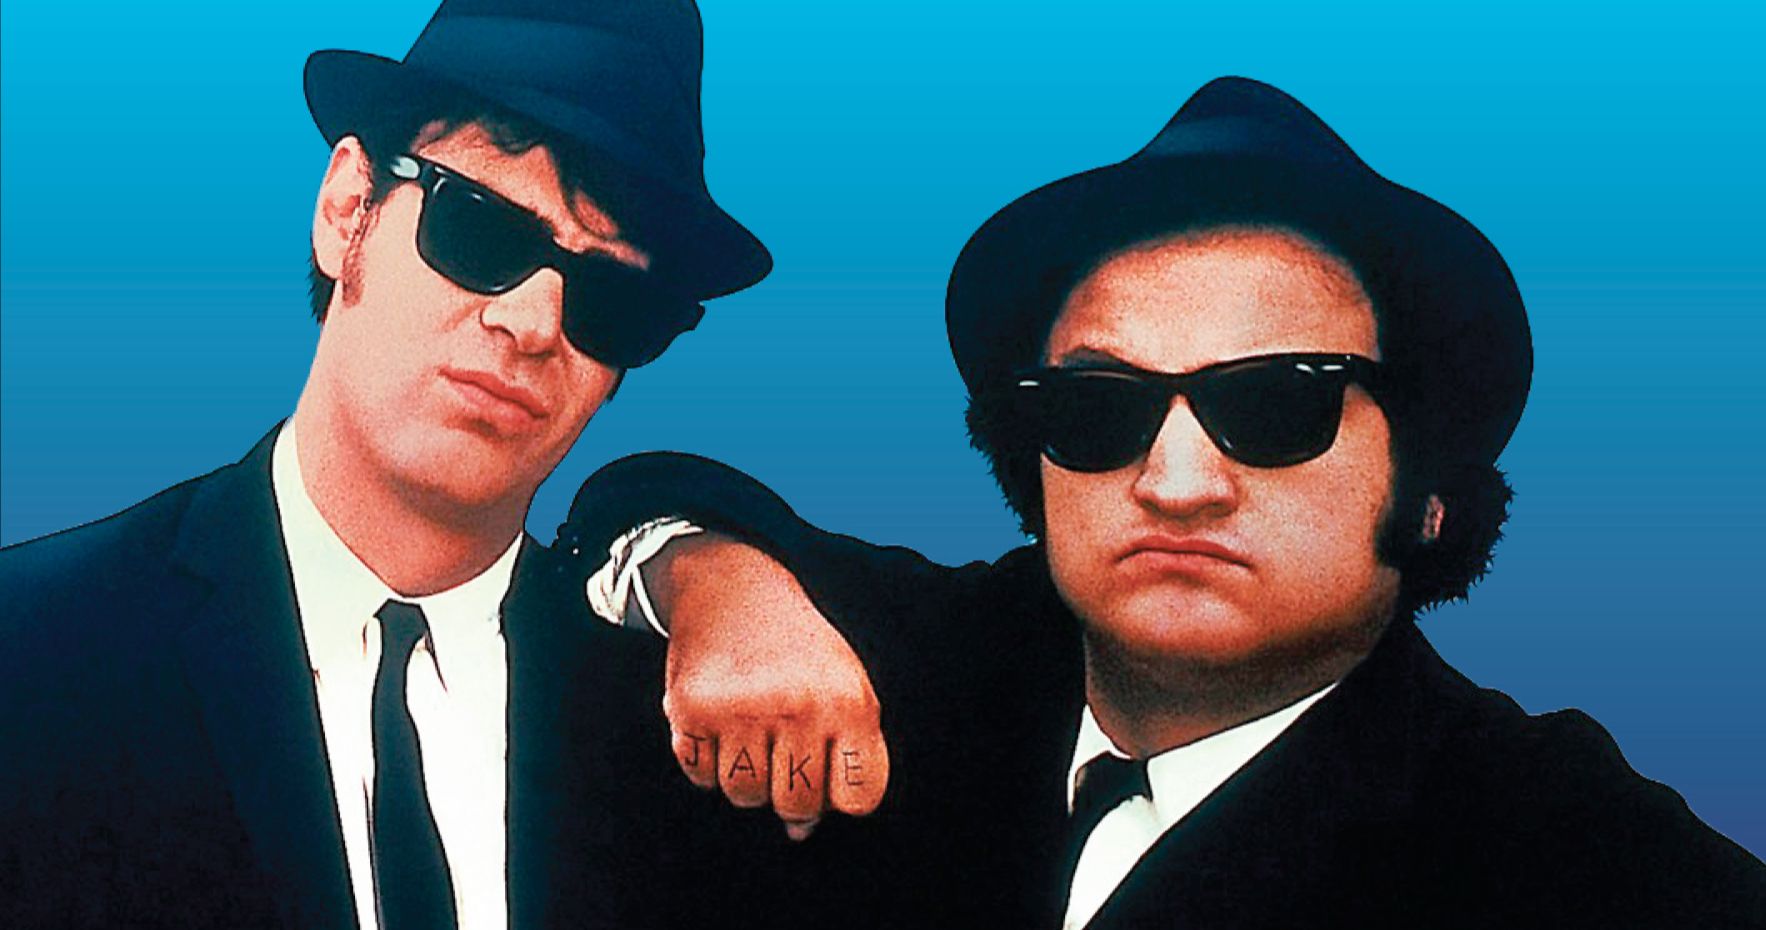 The Blues Brothers Declared a Catholic Classic by the Vatican